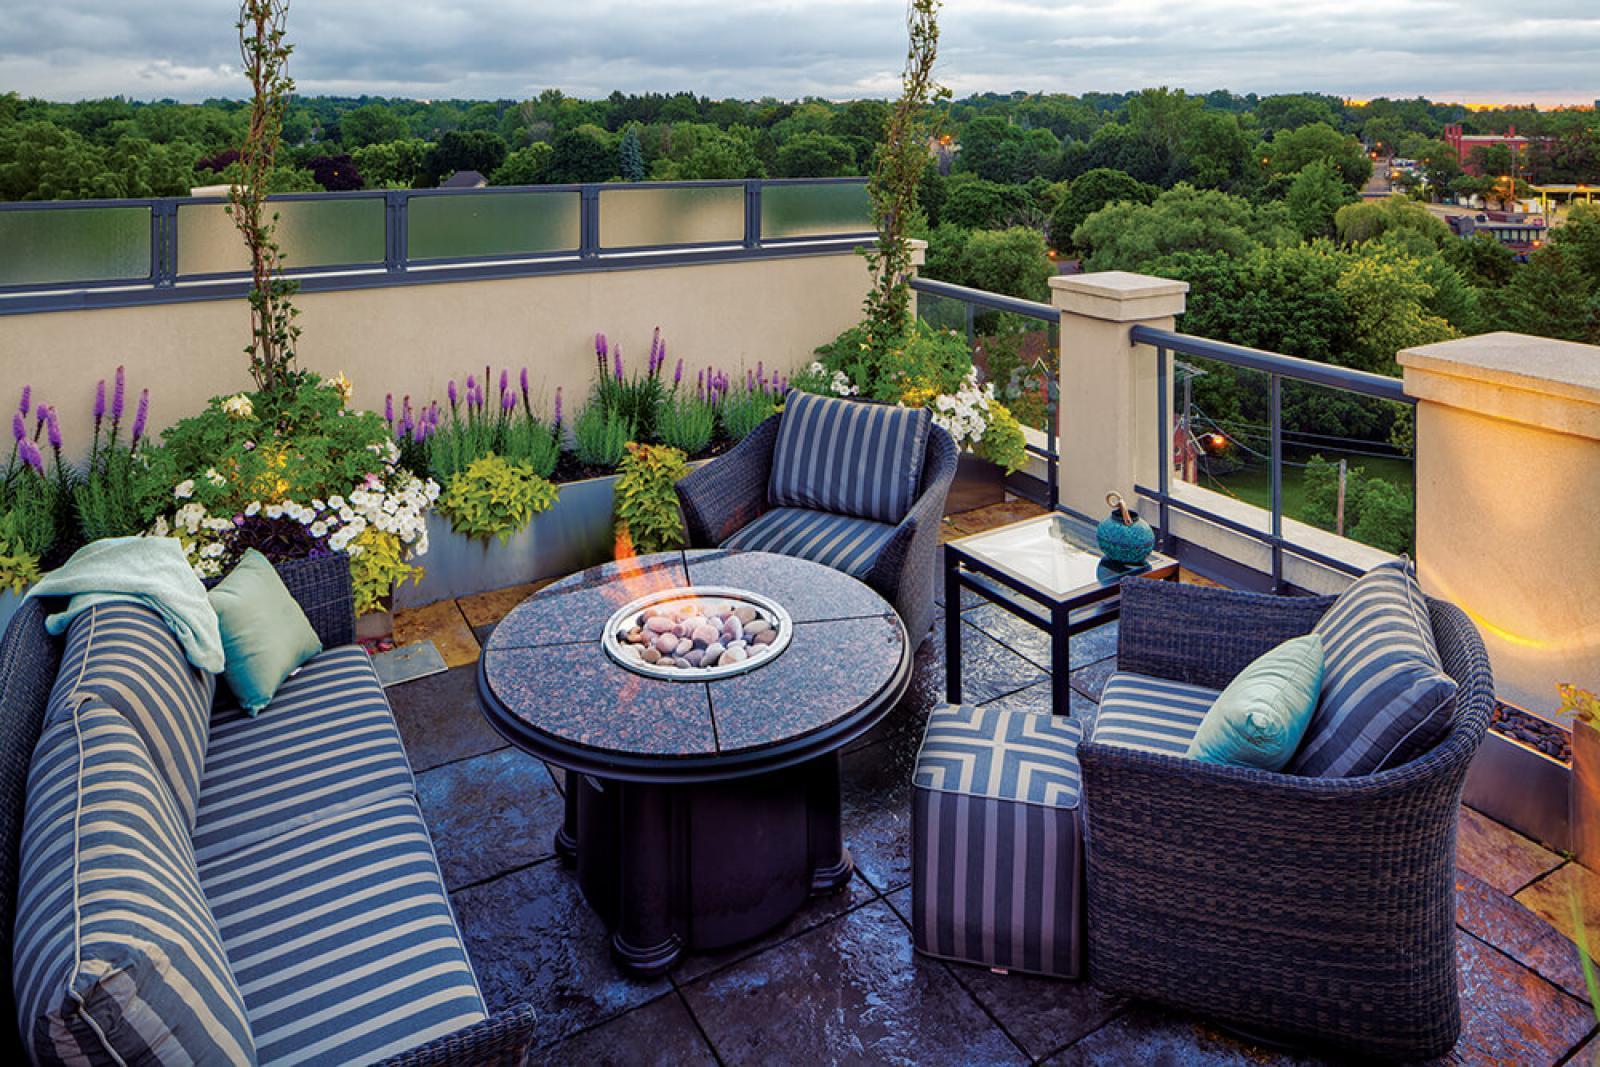 Condo living offers great outdoor space.